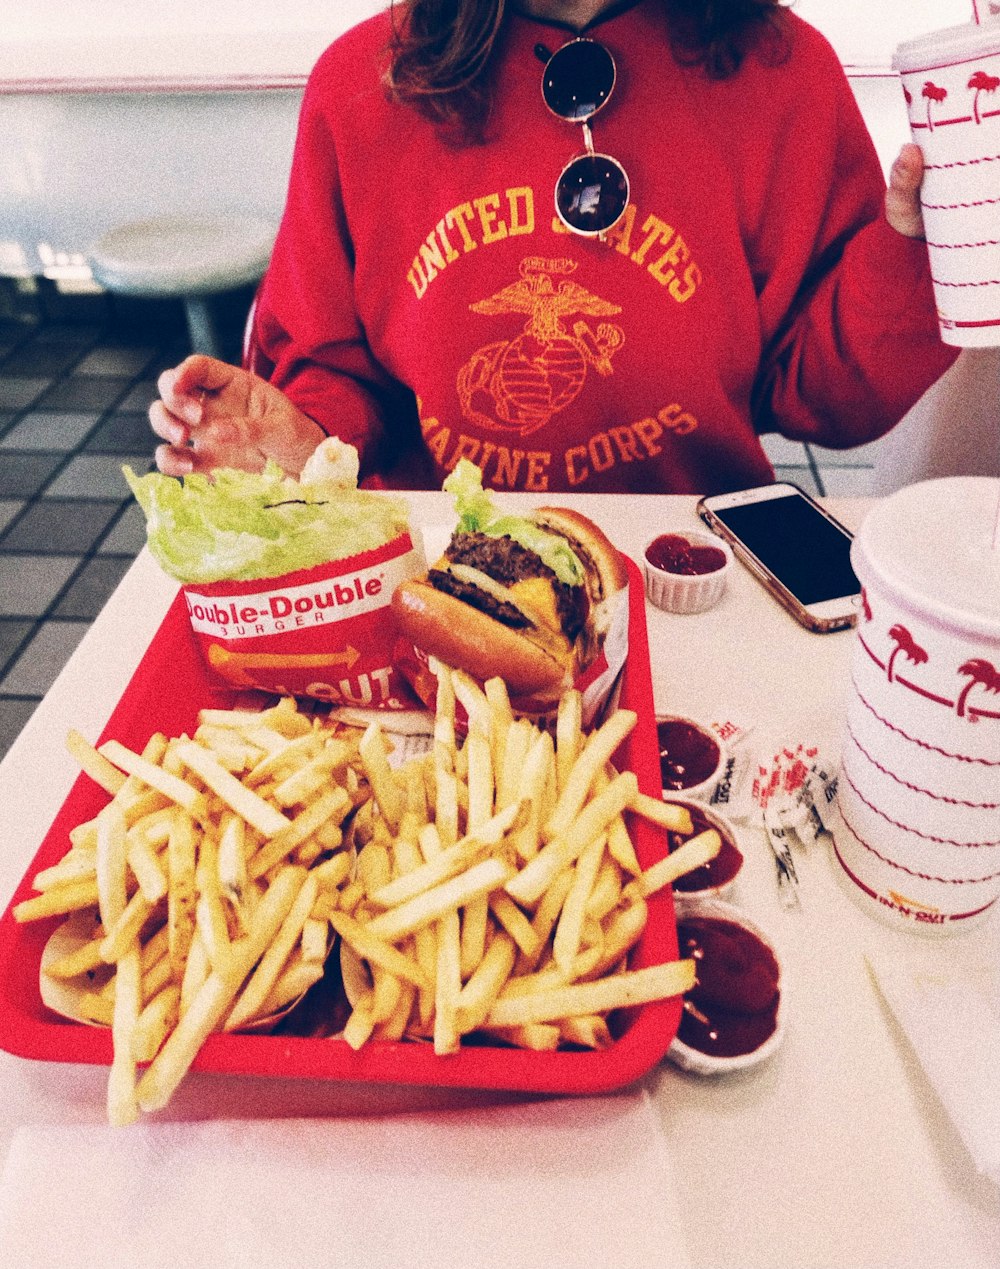 fries and burger in red container